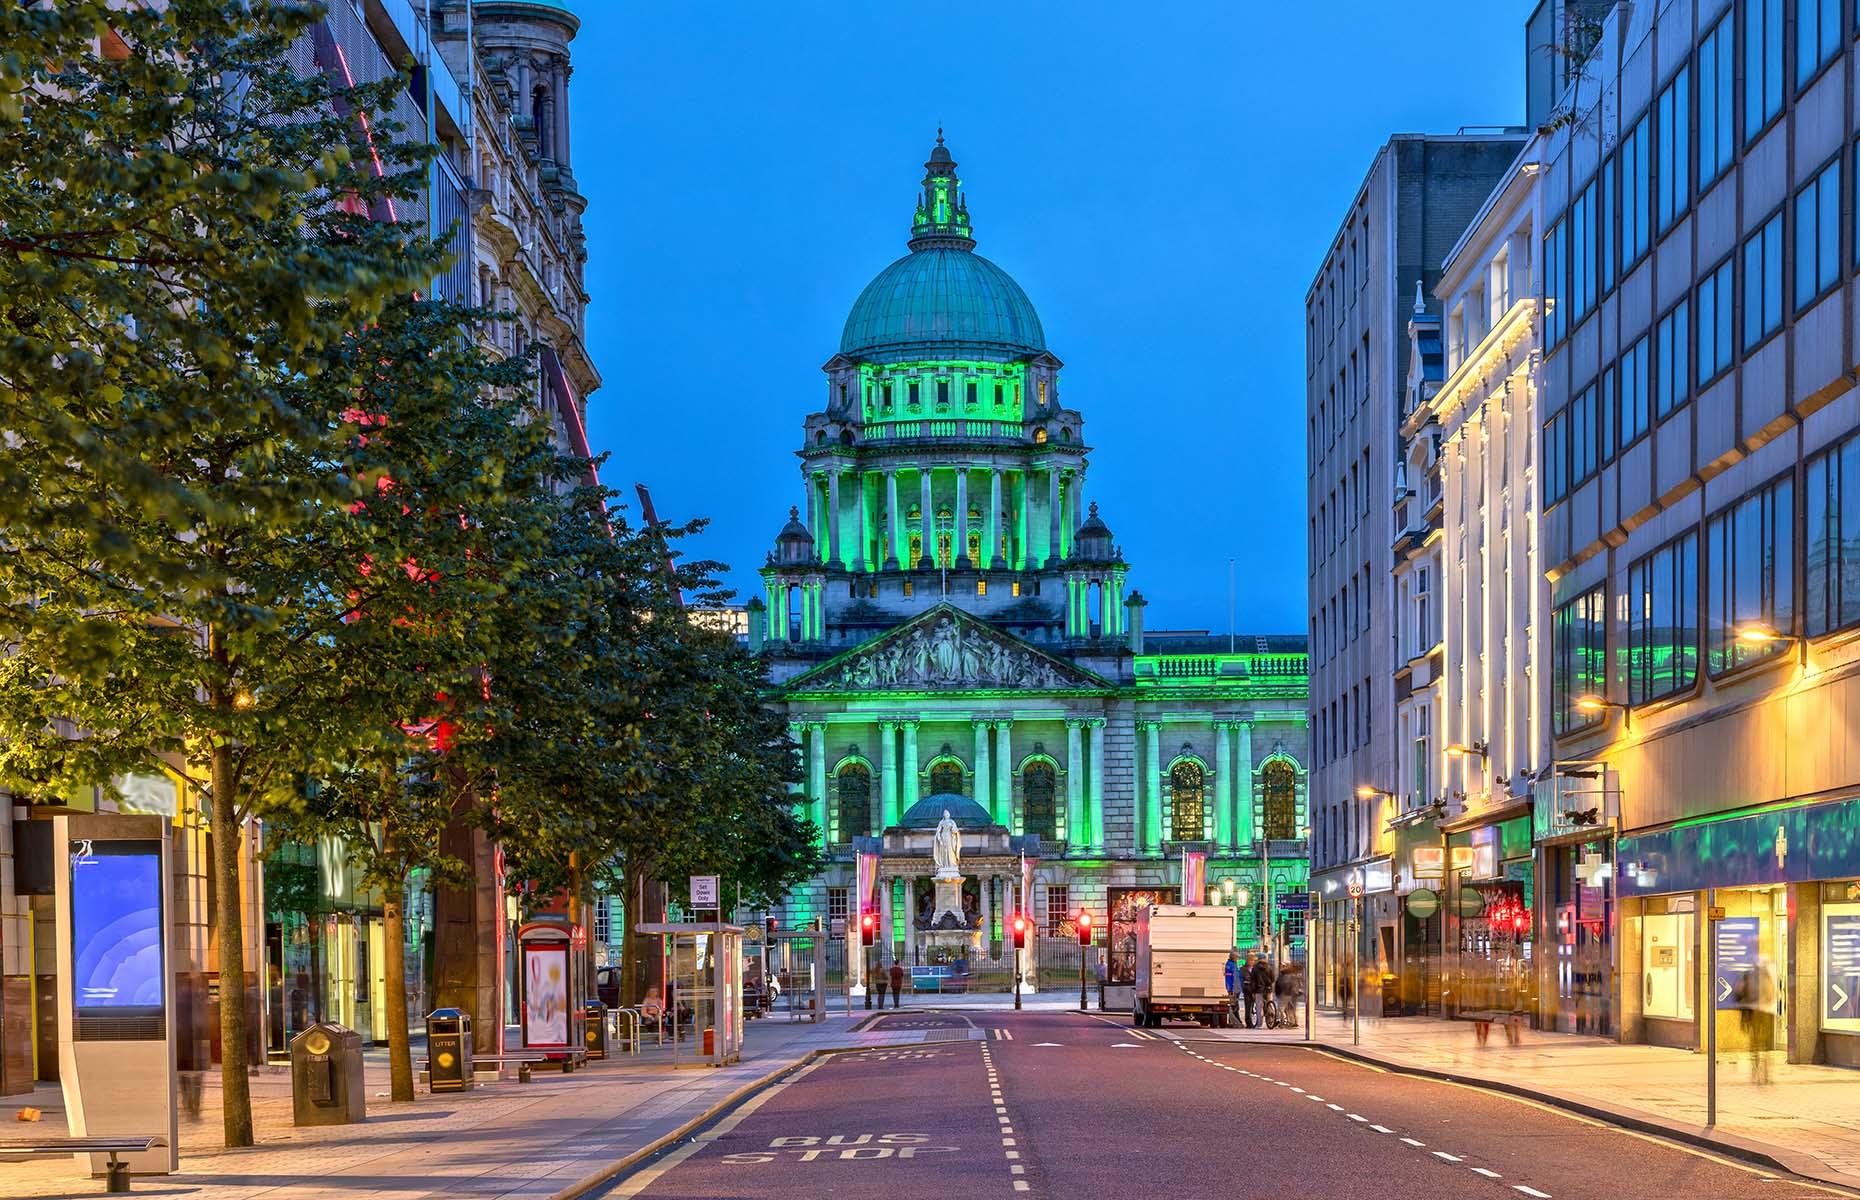 <p>There's a great energy about this proud city in Northern Ireland that is all too often overlooked. However, Belfast has its fair share of friendly pubs, traditional live music venues and world-class attractions, such as the <a href="https://titanicbelfast.com">Titanic Belfast</a>, <a href="https://www.nmni.com/our-museums/ulster-museum/Home.aspx">Ulster Museum</a> and <a href="https://themaclive.com/">The MAC culture centre</a>. St George's Market is a must-visit for sampling Northern Irish produce. Time to spare? The magnificent Mountains of Mourne and the Giant’s Causeway are a short drive away.</p>  <p><a href="https://www.loveexploring.com/galleries/107456/the-uks-most-stunning-natural-wonders?page=1"><strong>Discover the UK's most stunning natural wonders</strong></a></p>